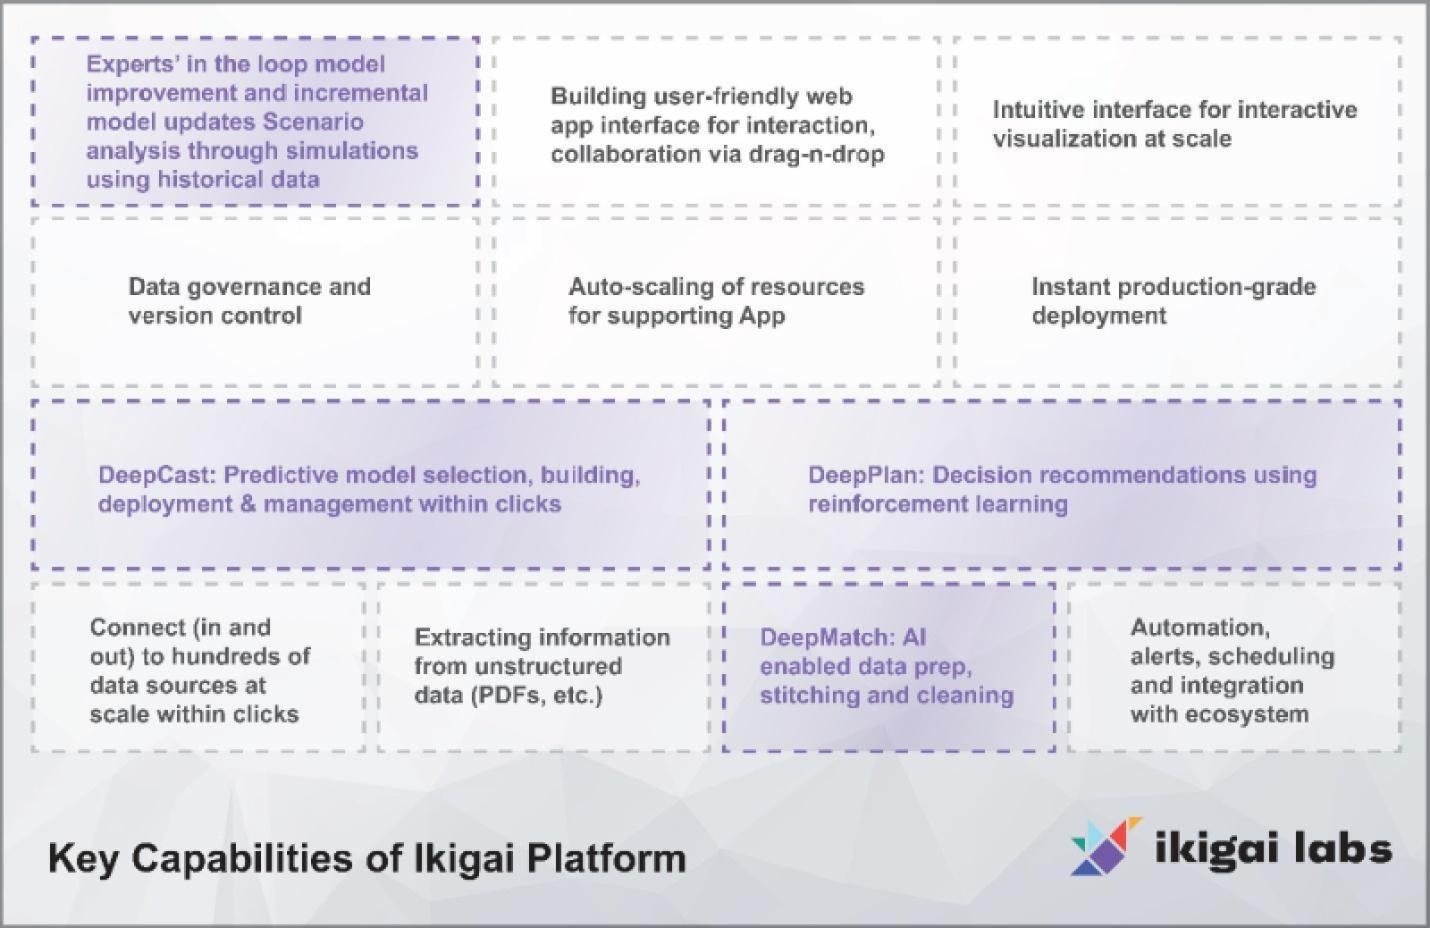 The Ikigai platform's unique capabilities, DeepMatch, DeepCast, EiTL and DeepPlan, are enabled by its core technology of large graphical models. Source: Ikigai Labs